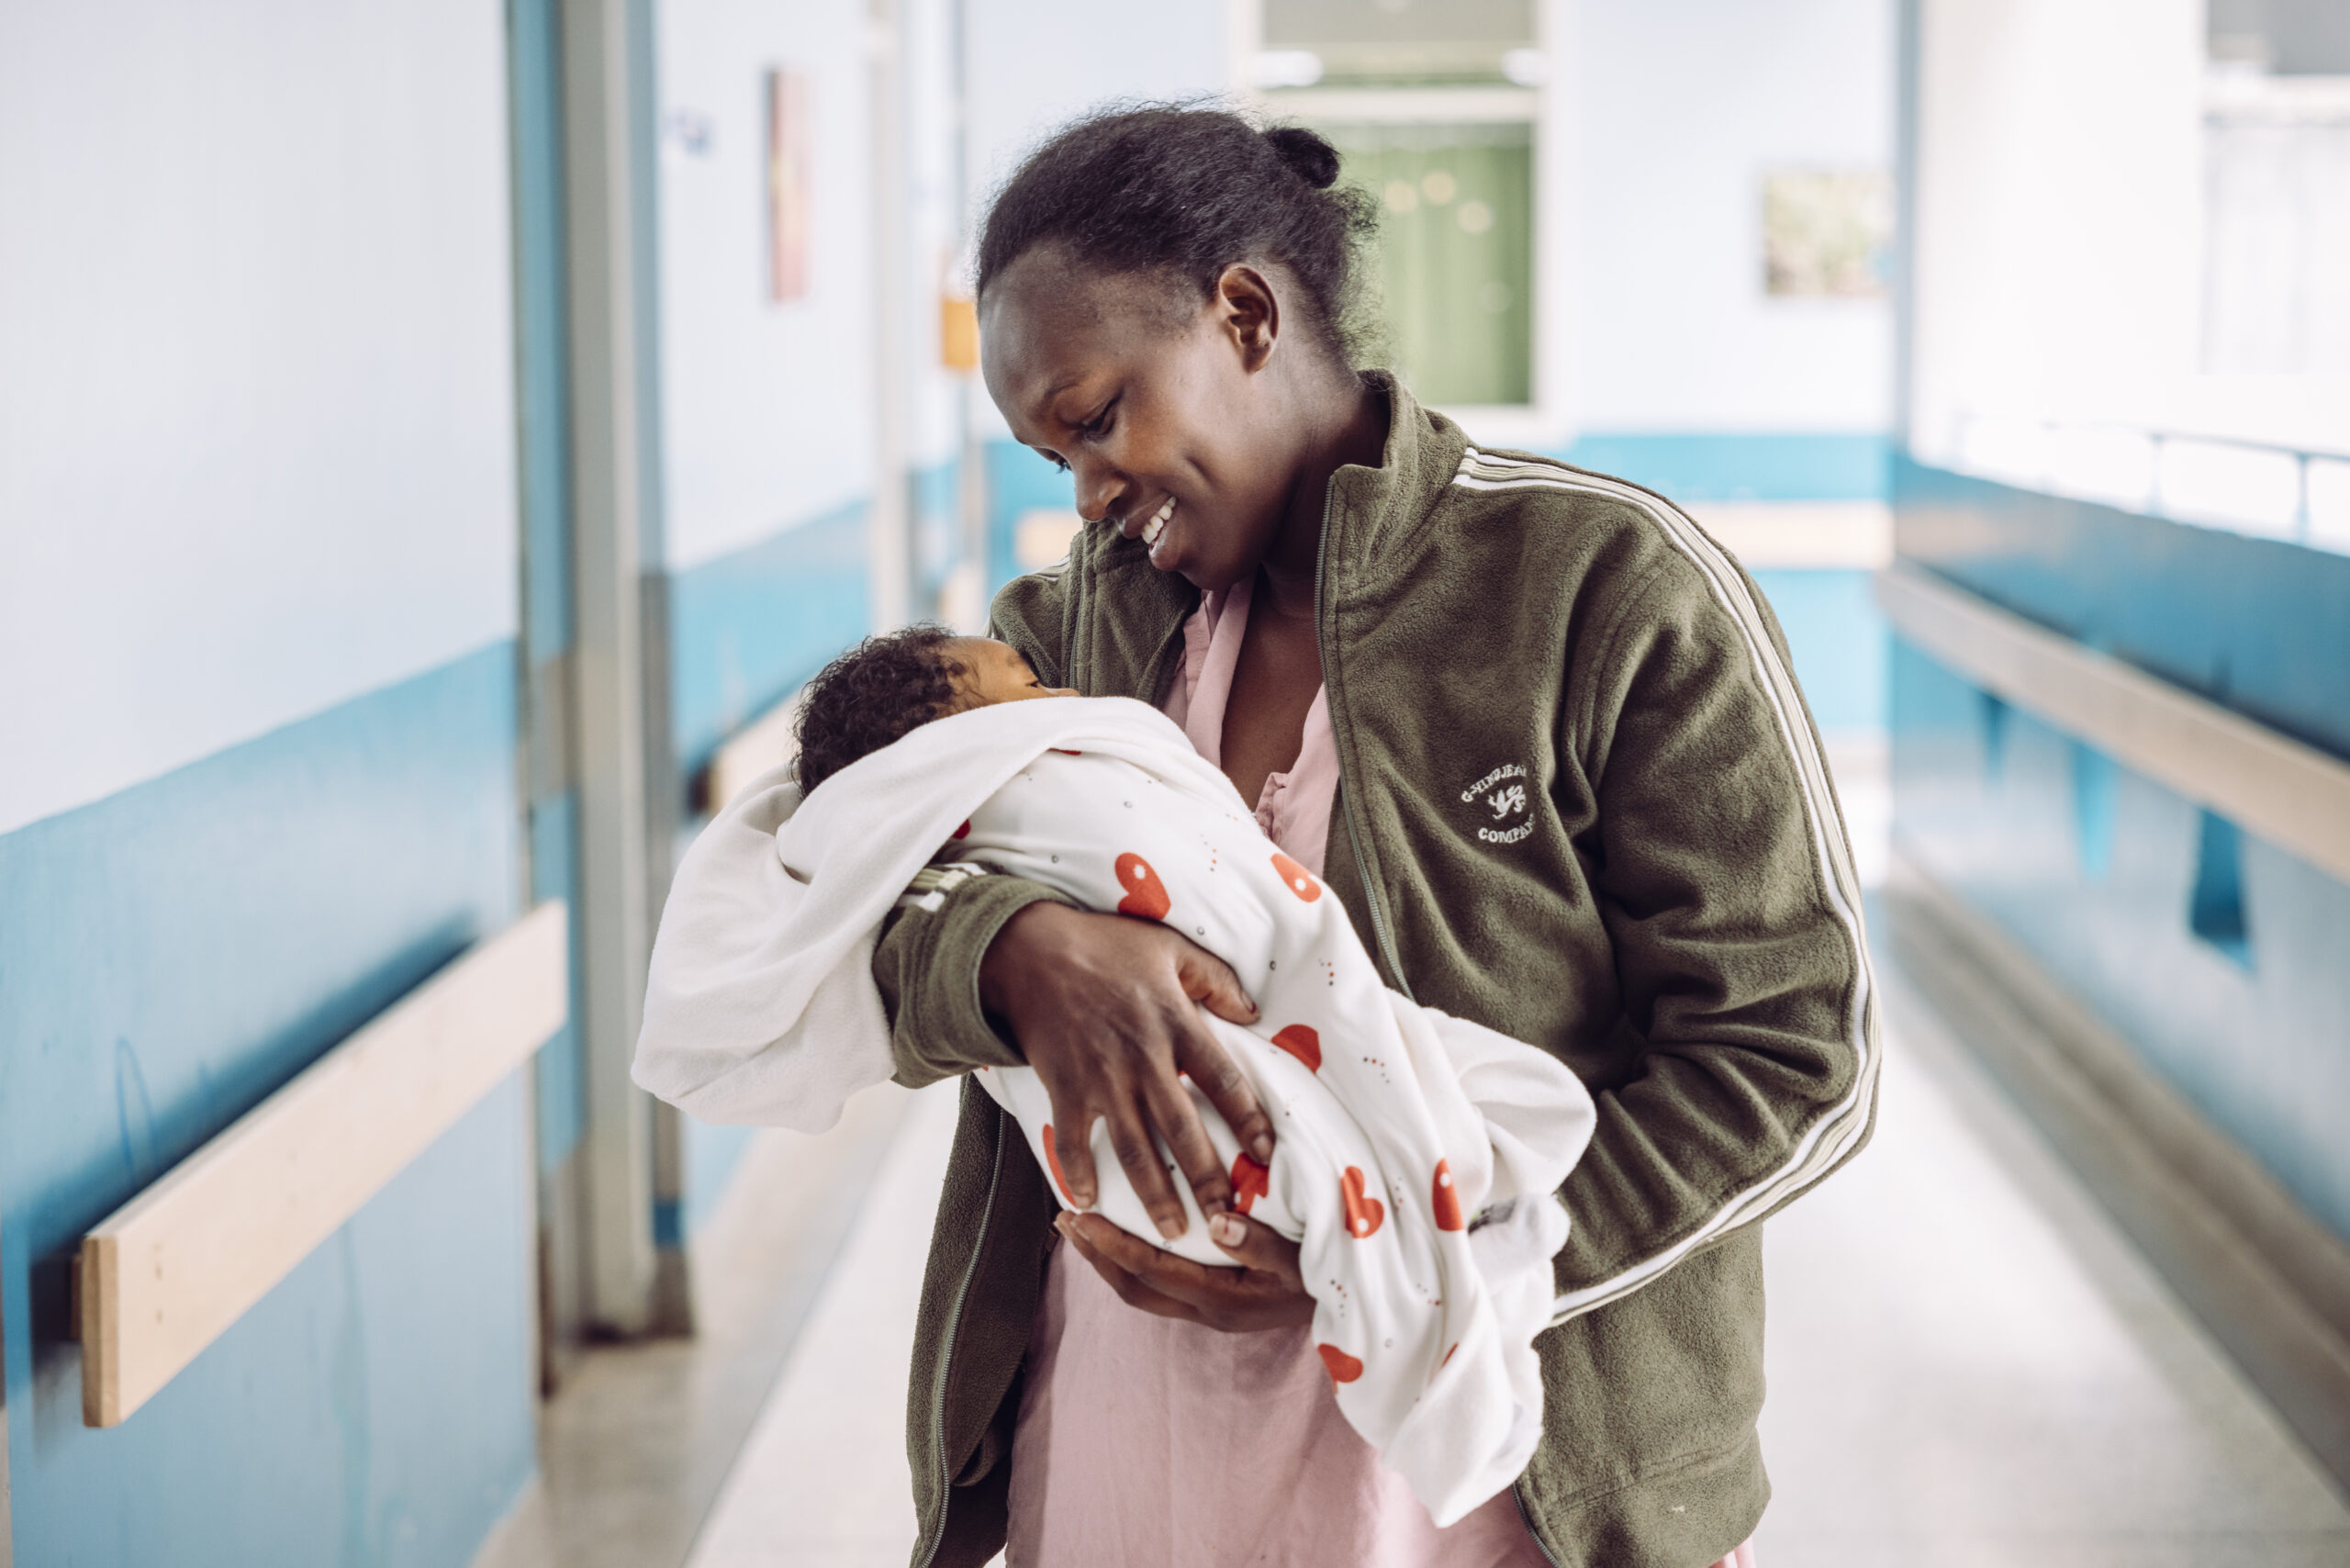 High quality emergency obstetric and maternal care is of the utmost importance at mission hospitals around the world, especially in cases like abruptions.